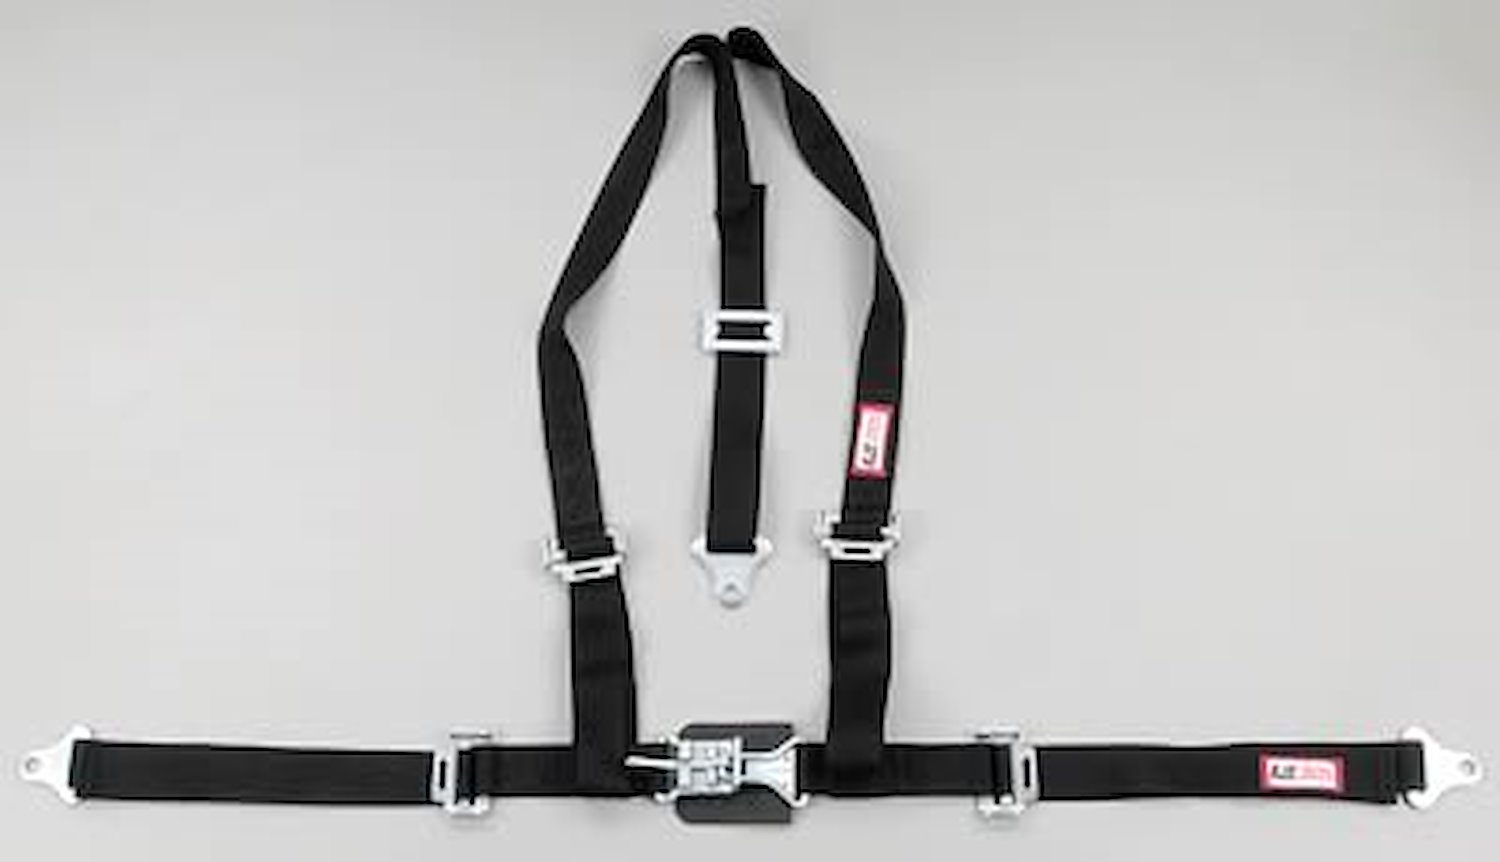 NON-SFI L&L HARNESS 2 PULL UP Lap Belt SNAP SEWN IN 2 S.H. Y FLOOR Mount w/STERNUM STRAP WRAP/BOLT RED